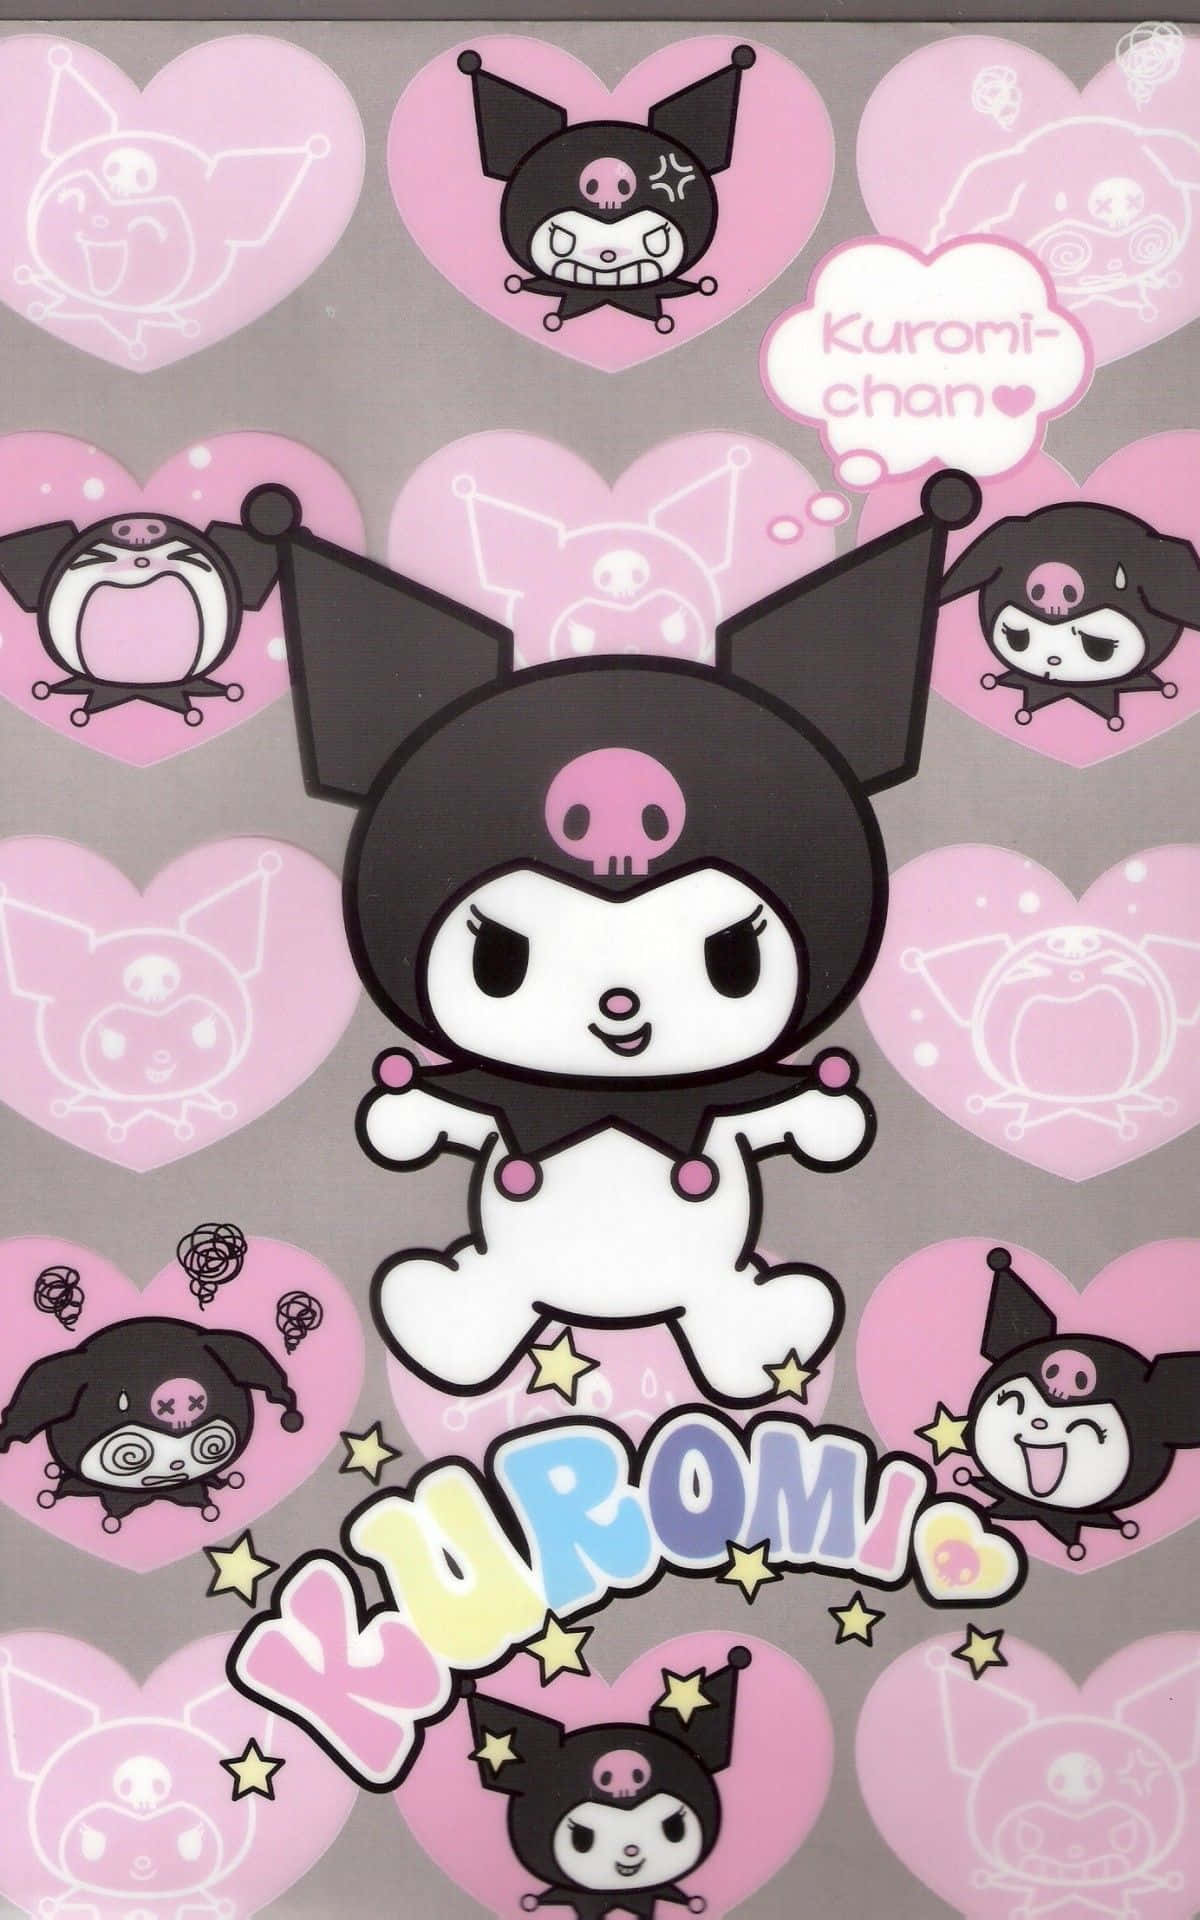 Download Enjoy your Kuromi iPhone, the perfect choice for those who love the adorable Hello Kitty character. Wallpaper